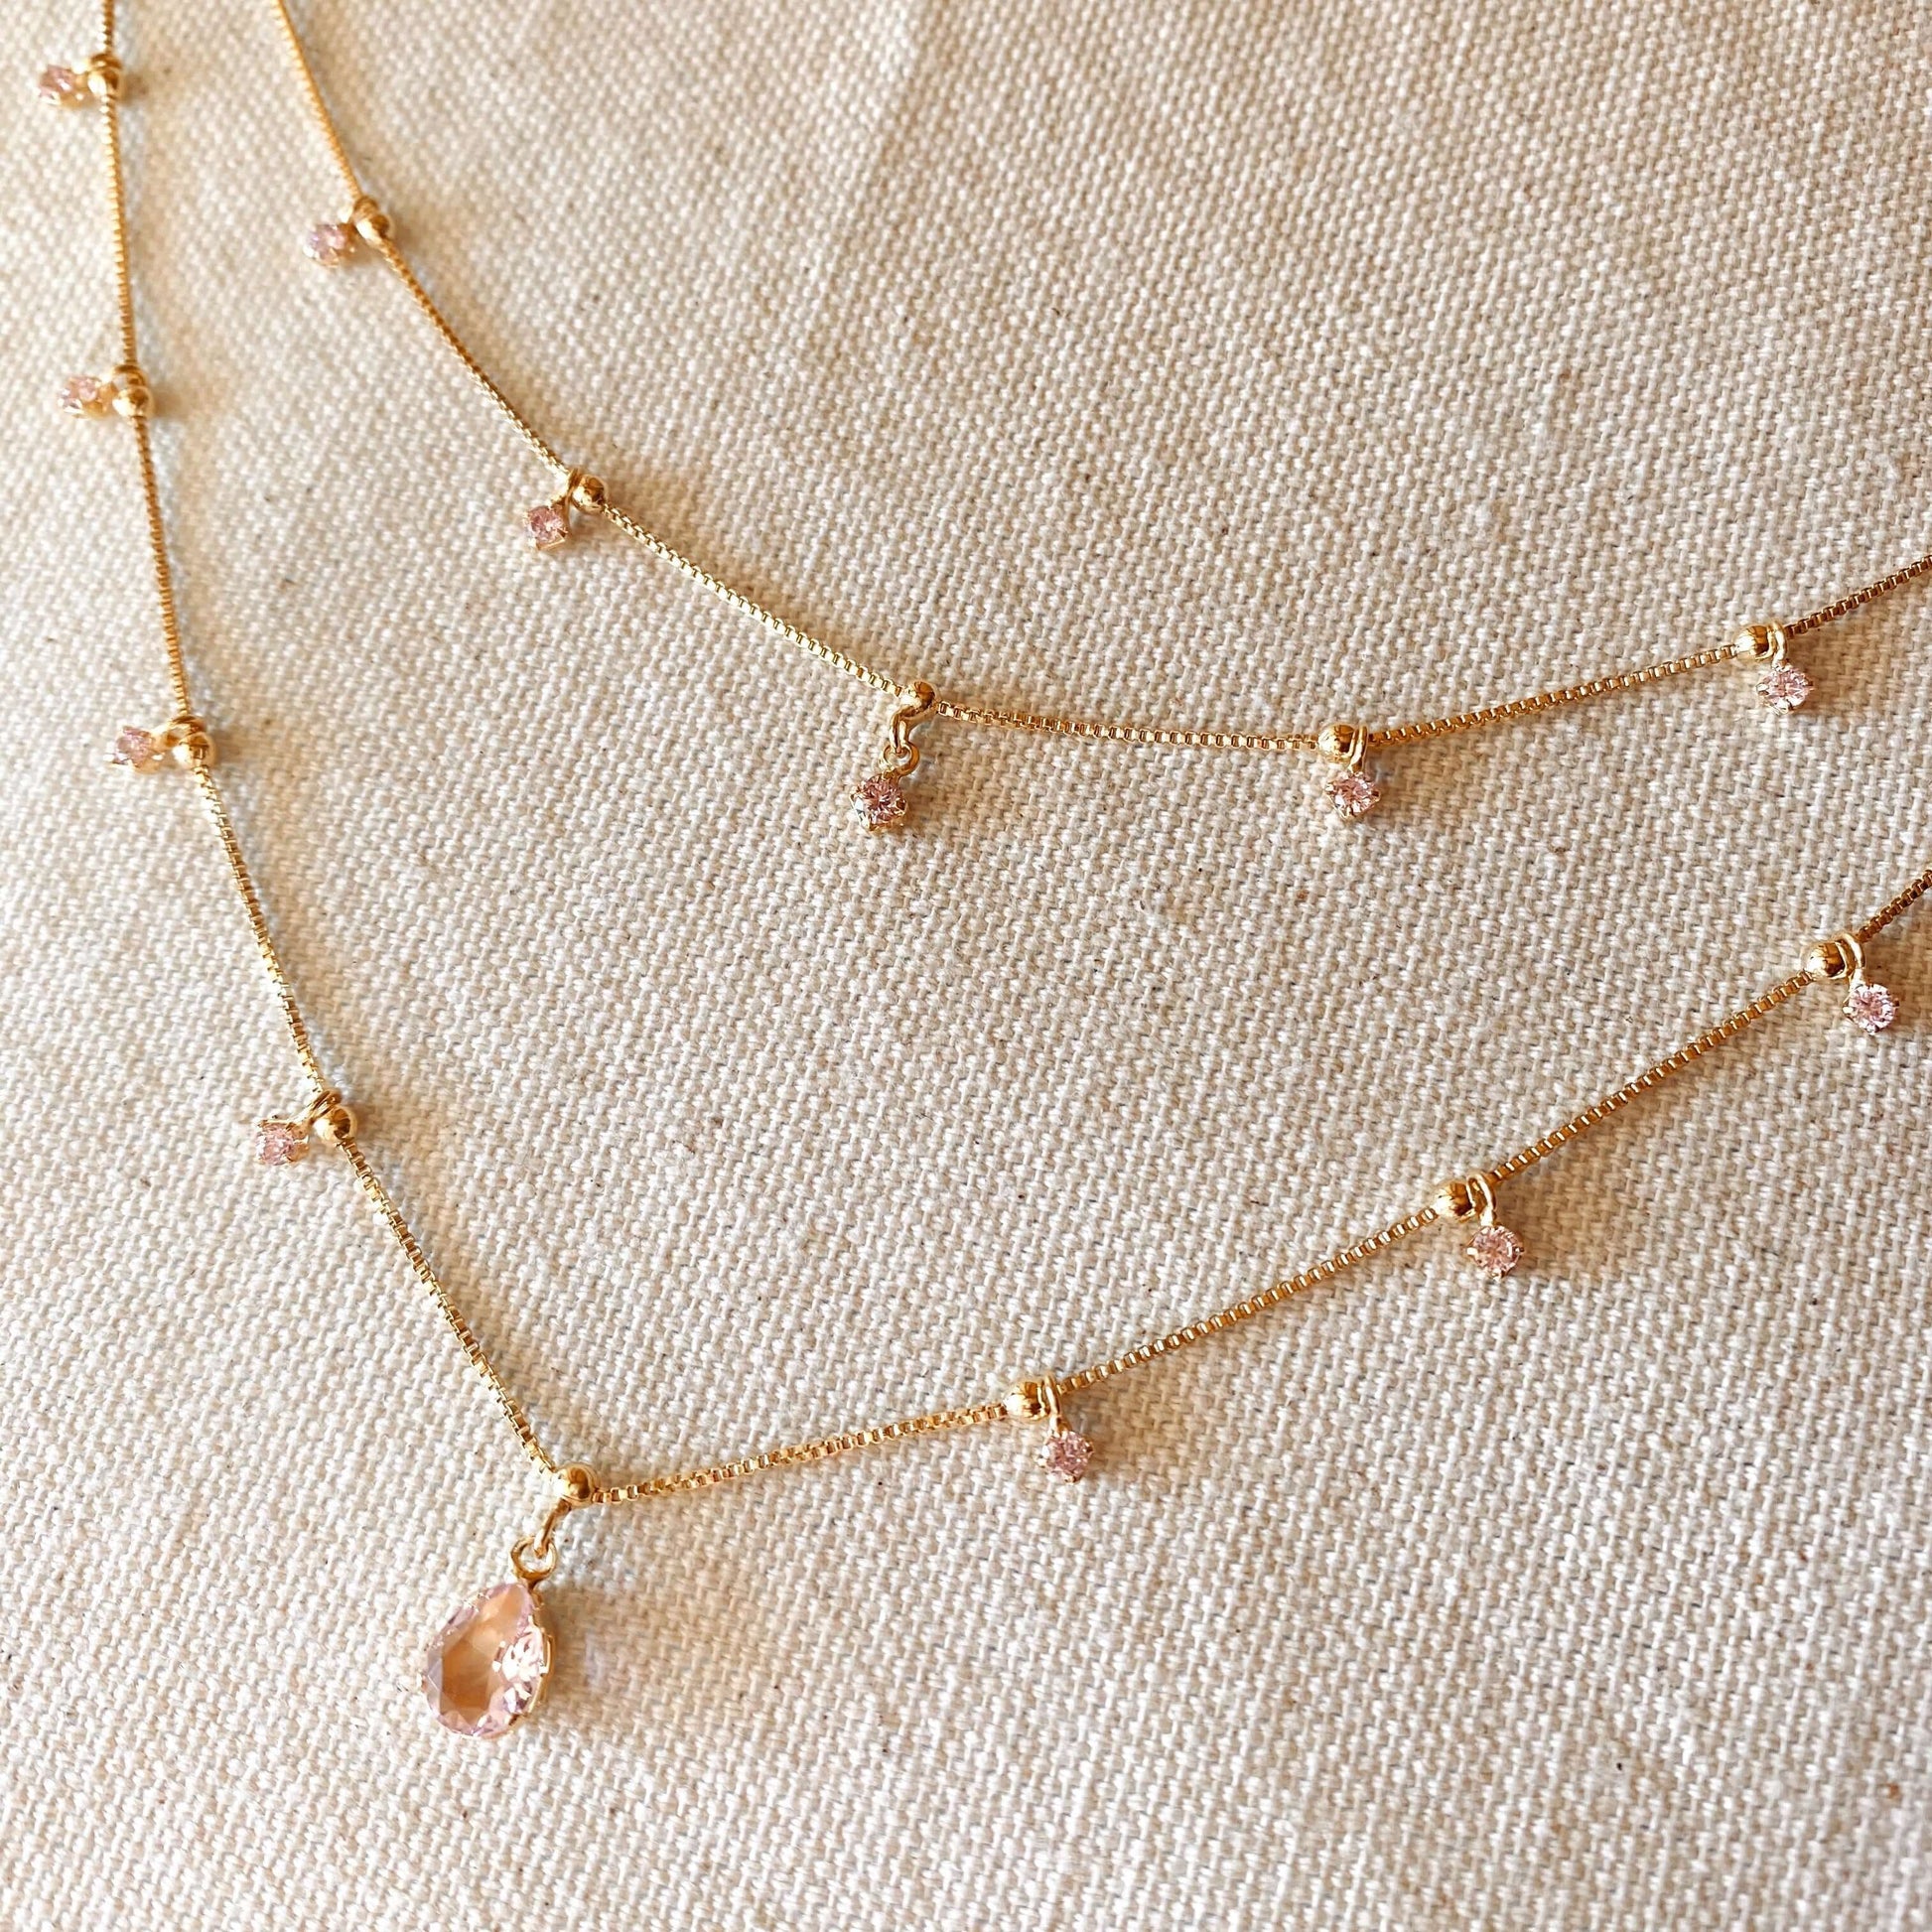 How to Layer Your Jewelry - The Girl from Panama